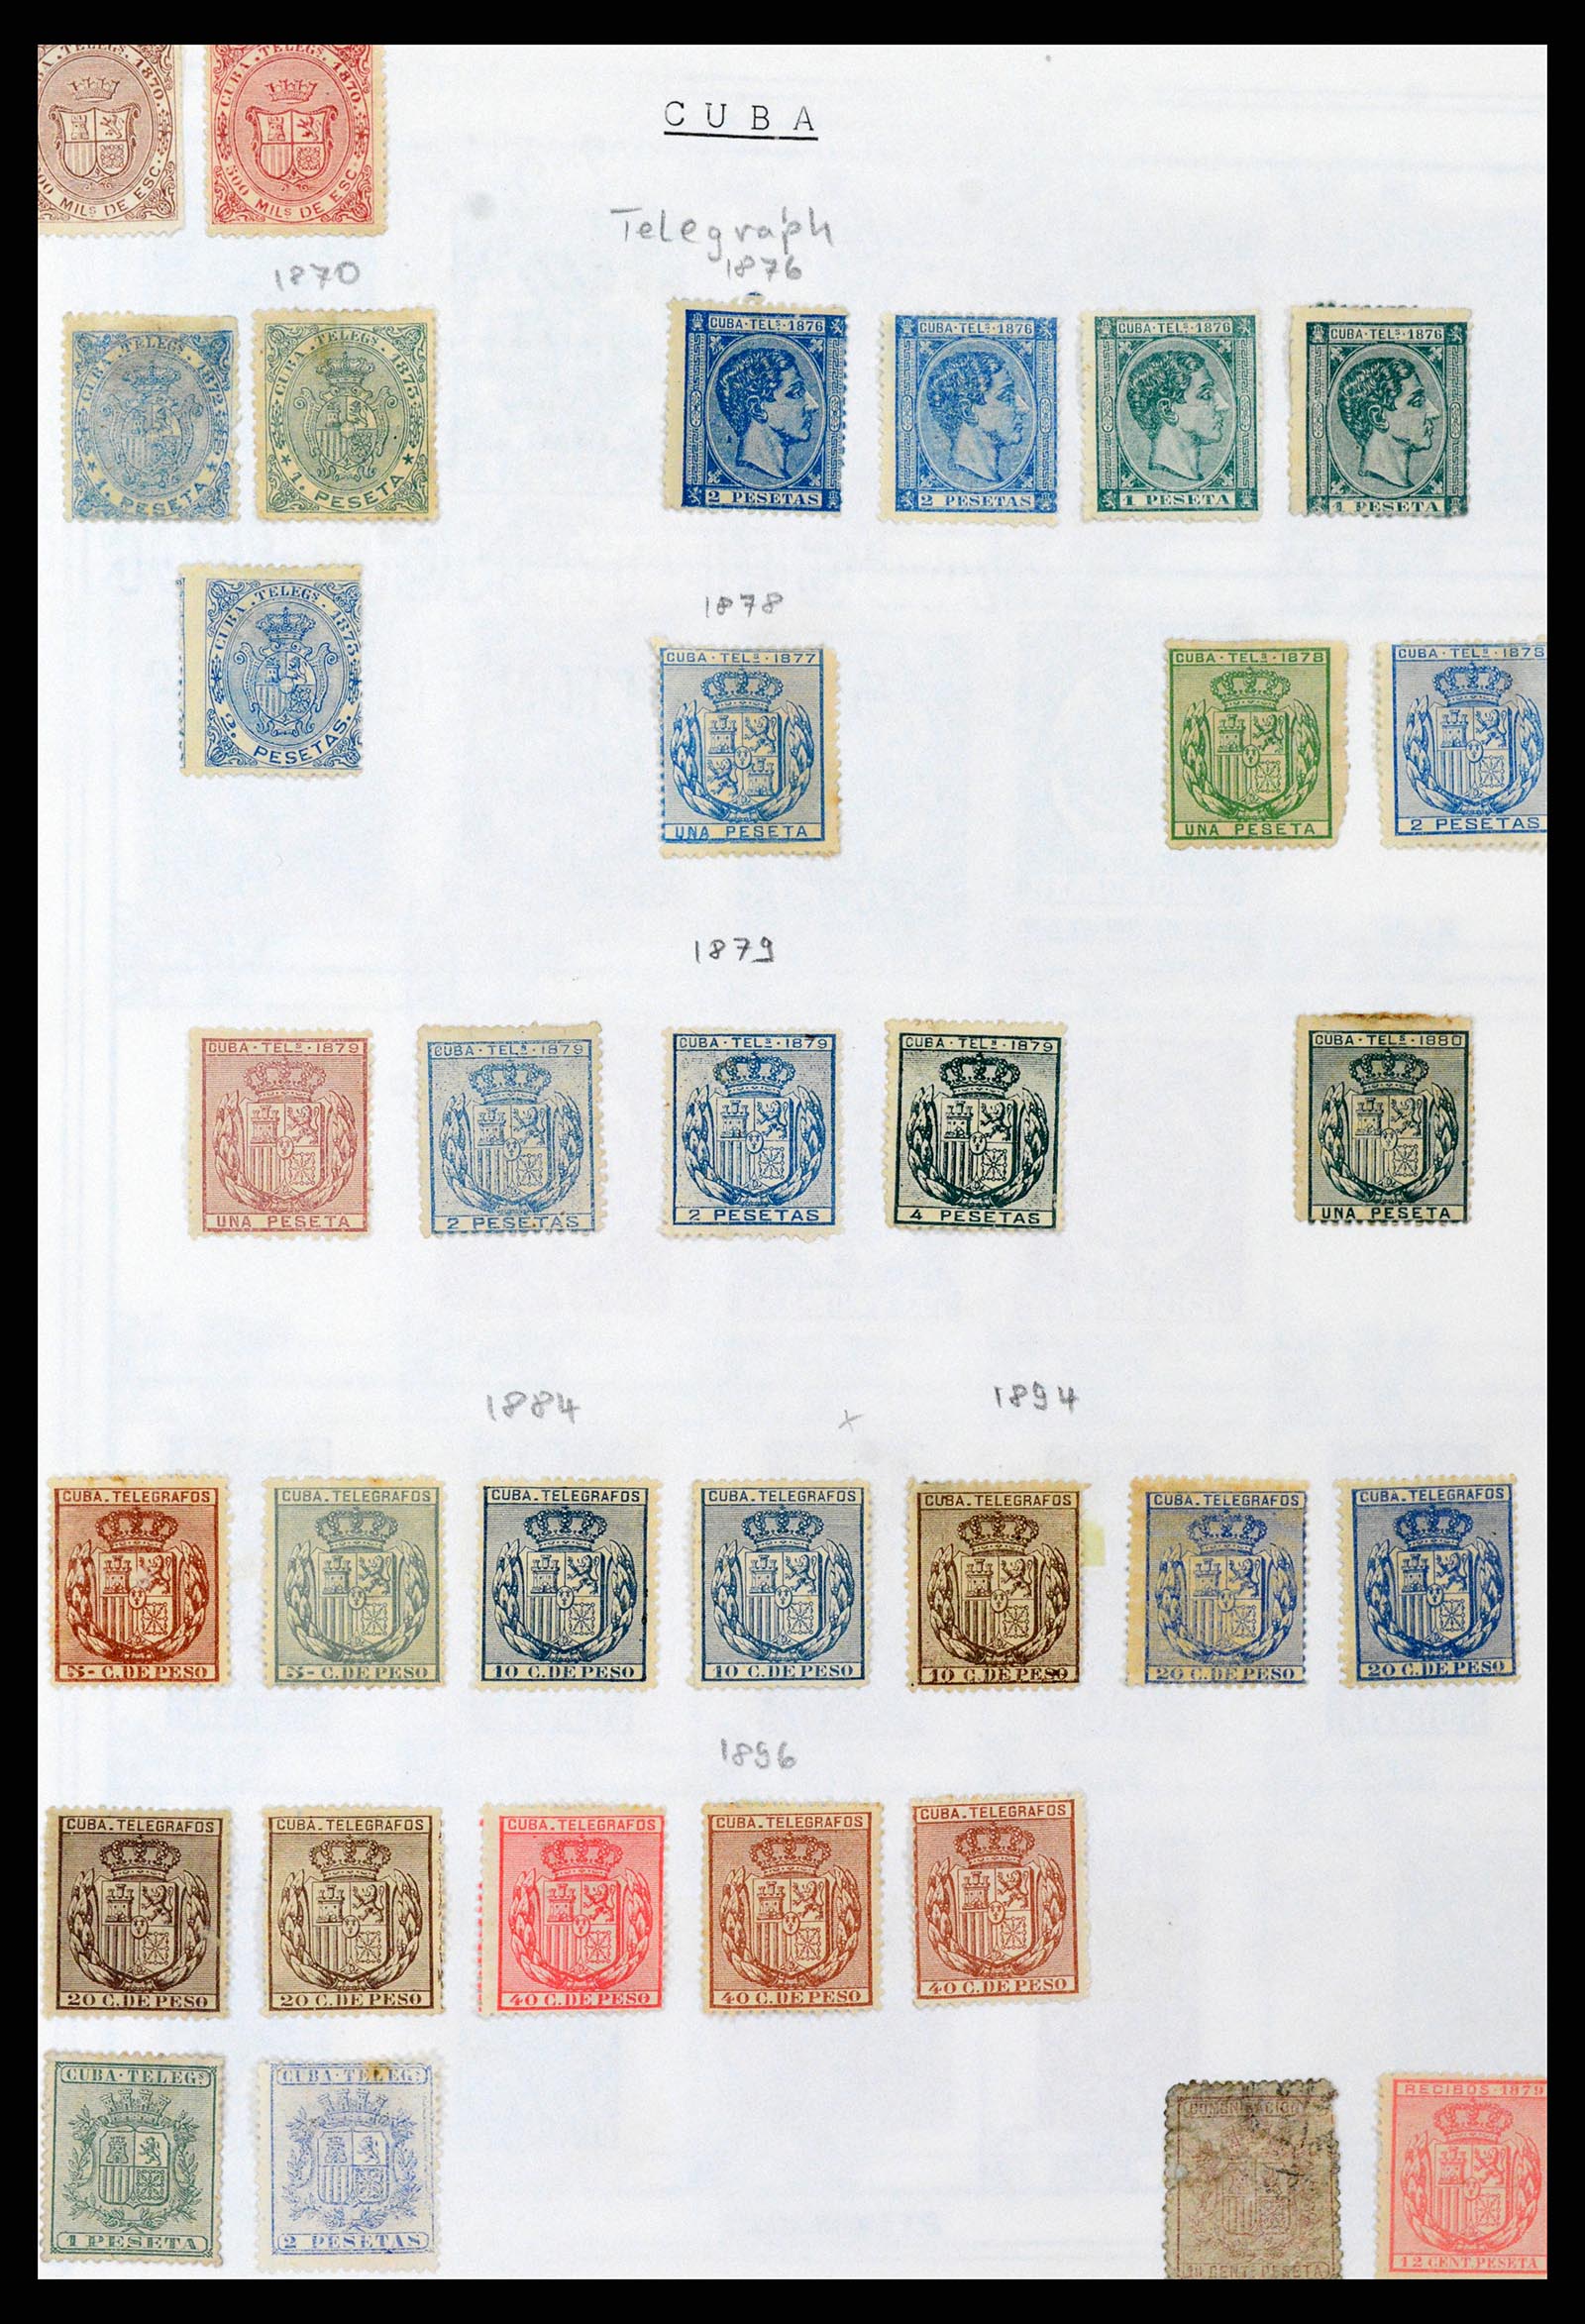 37228 740 - Stamp collection 37228 Cuba 1855-2009.